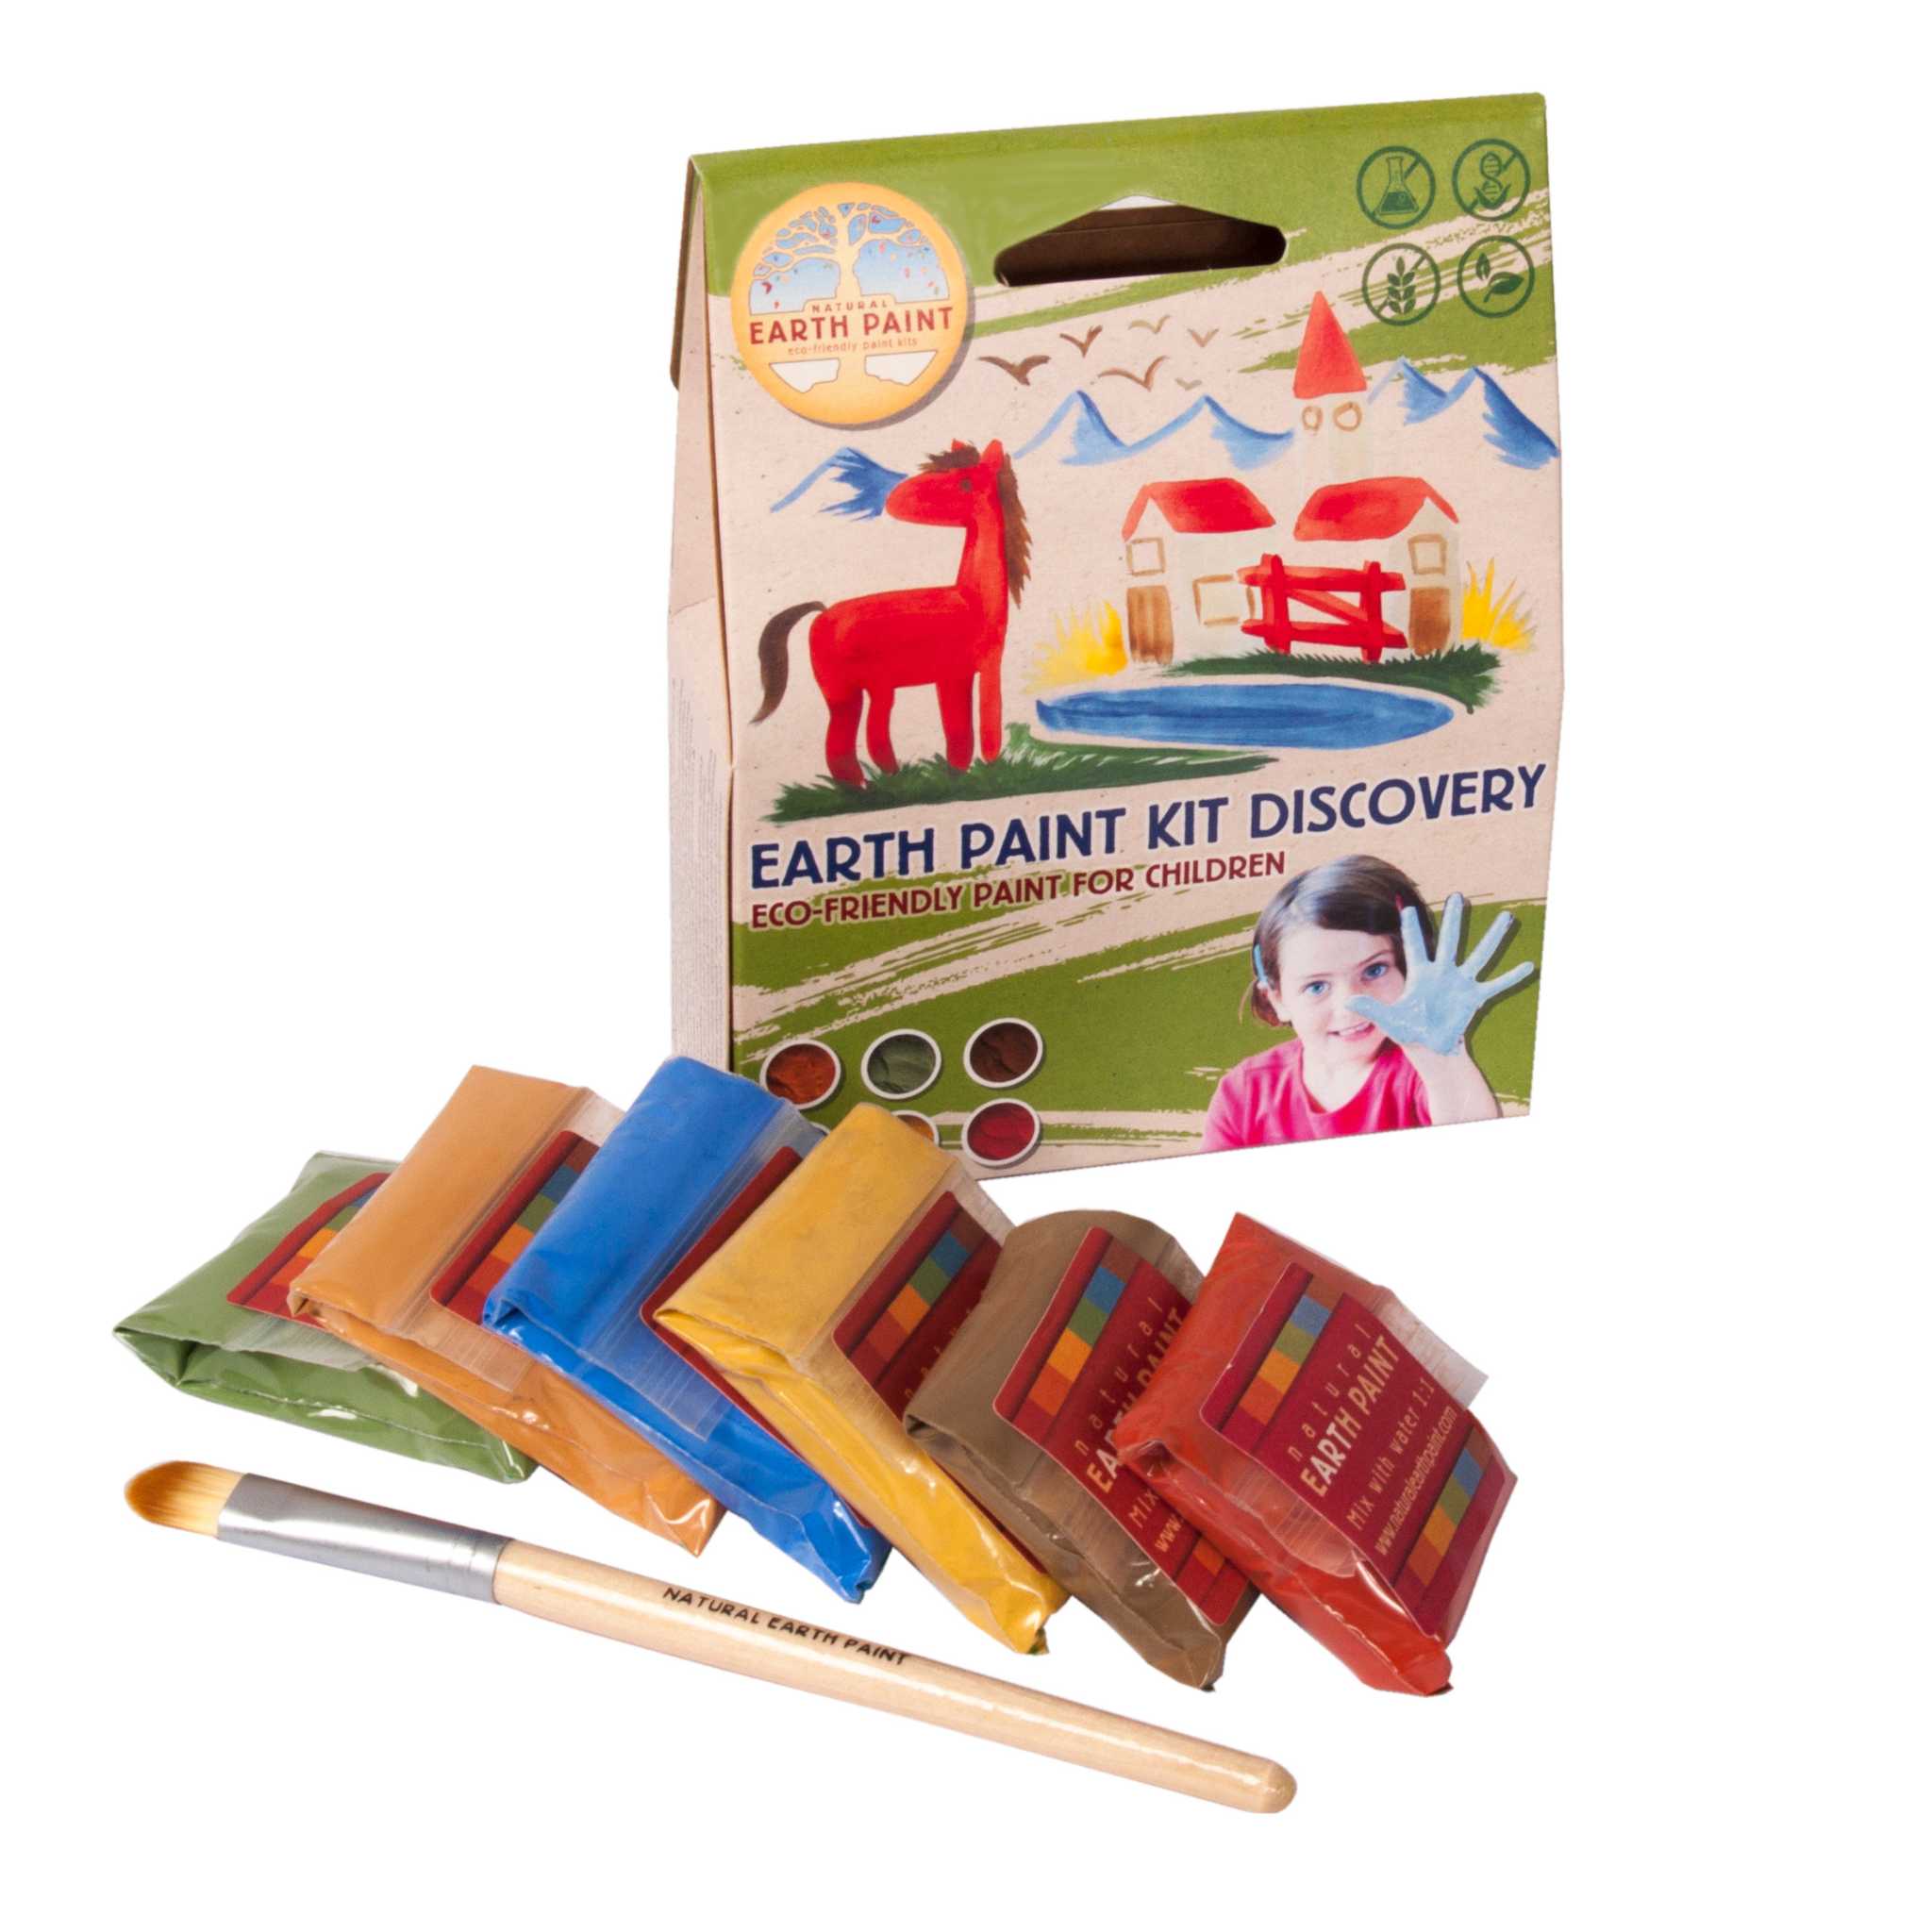 Natural Earth Paint Kit - Discovery - Showing Box & Contents 